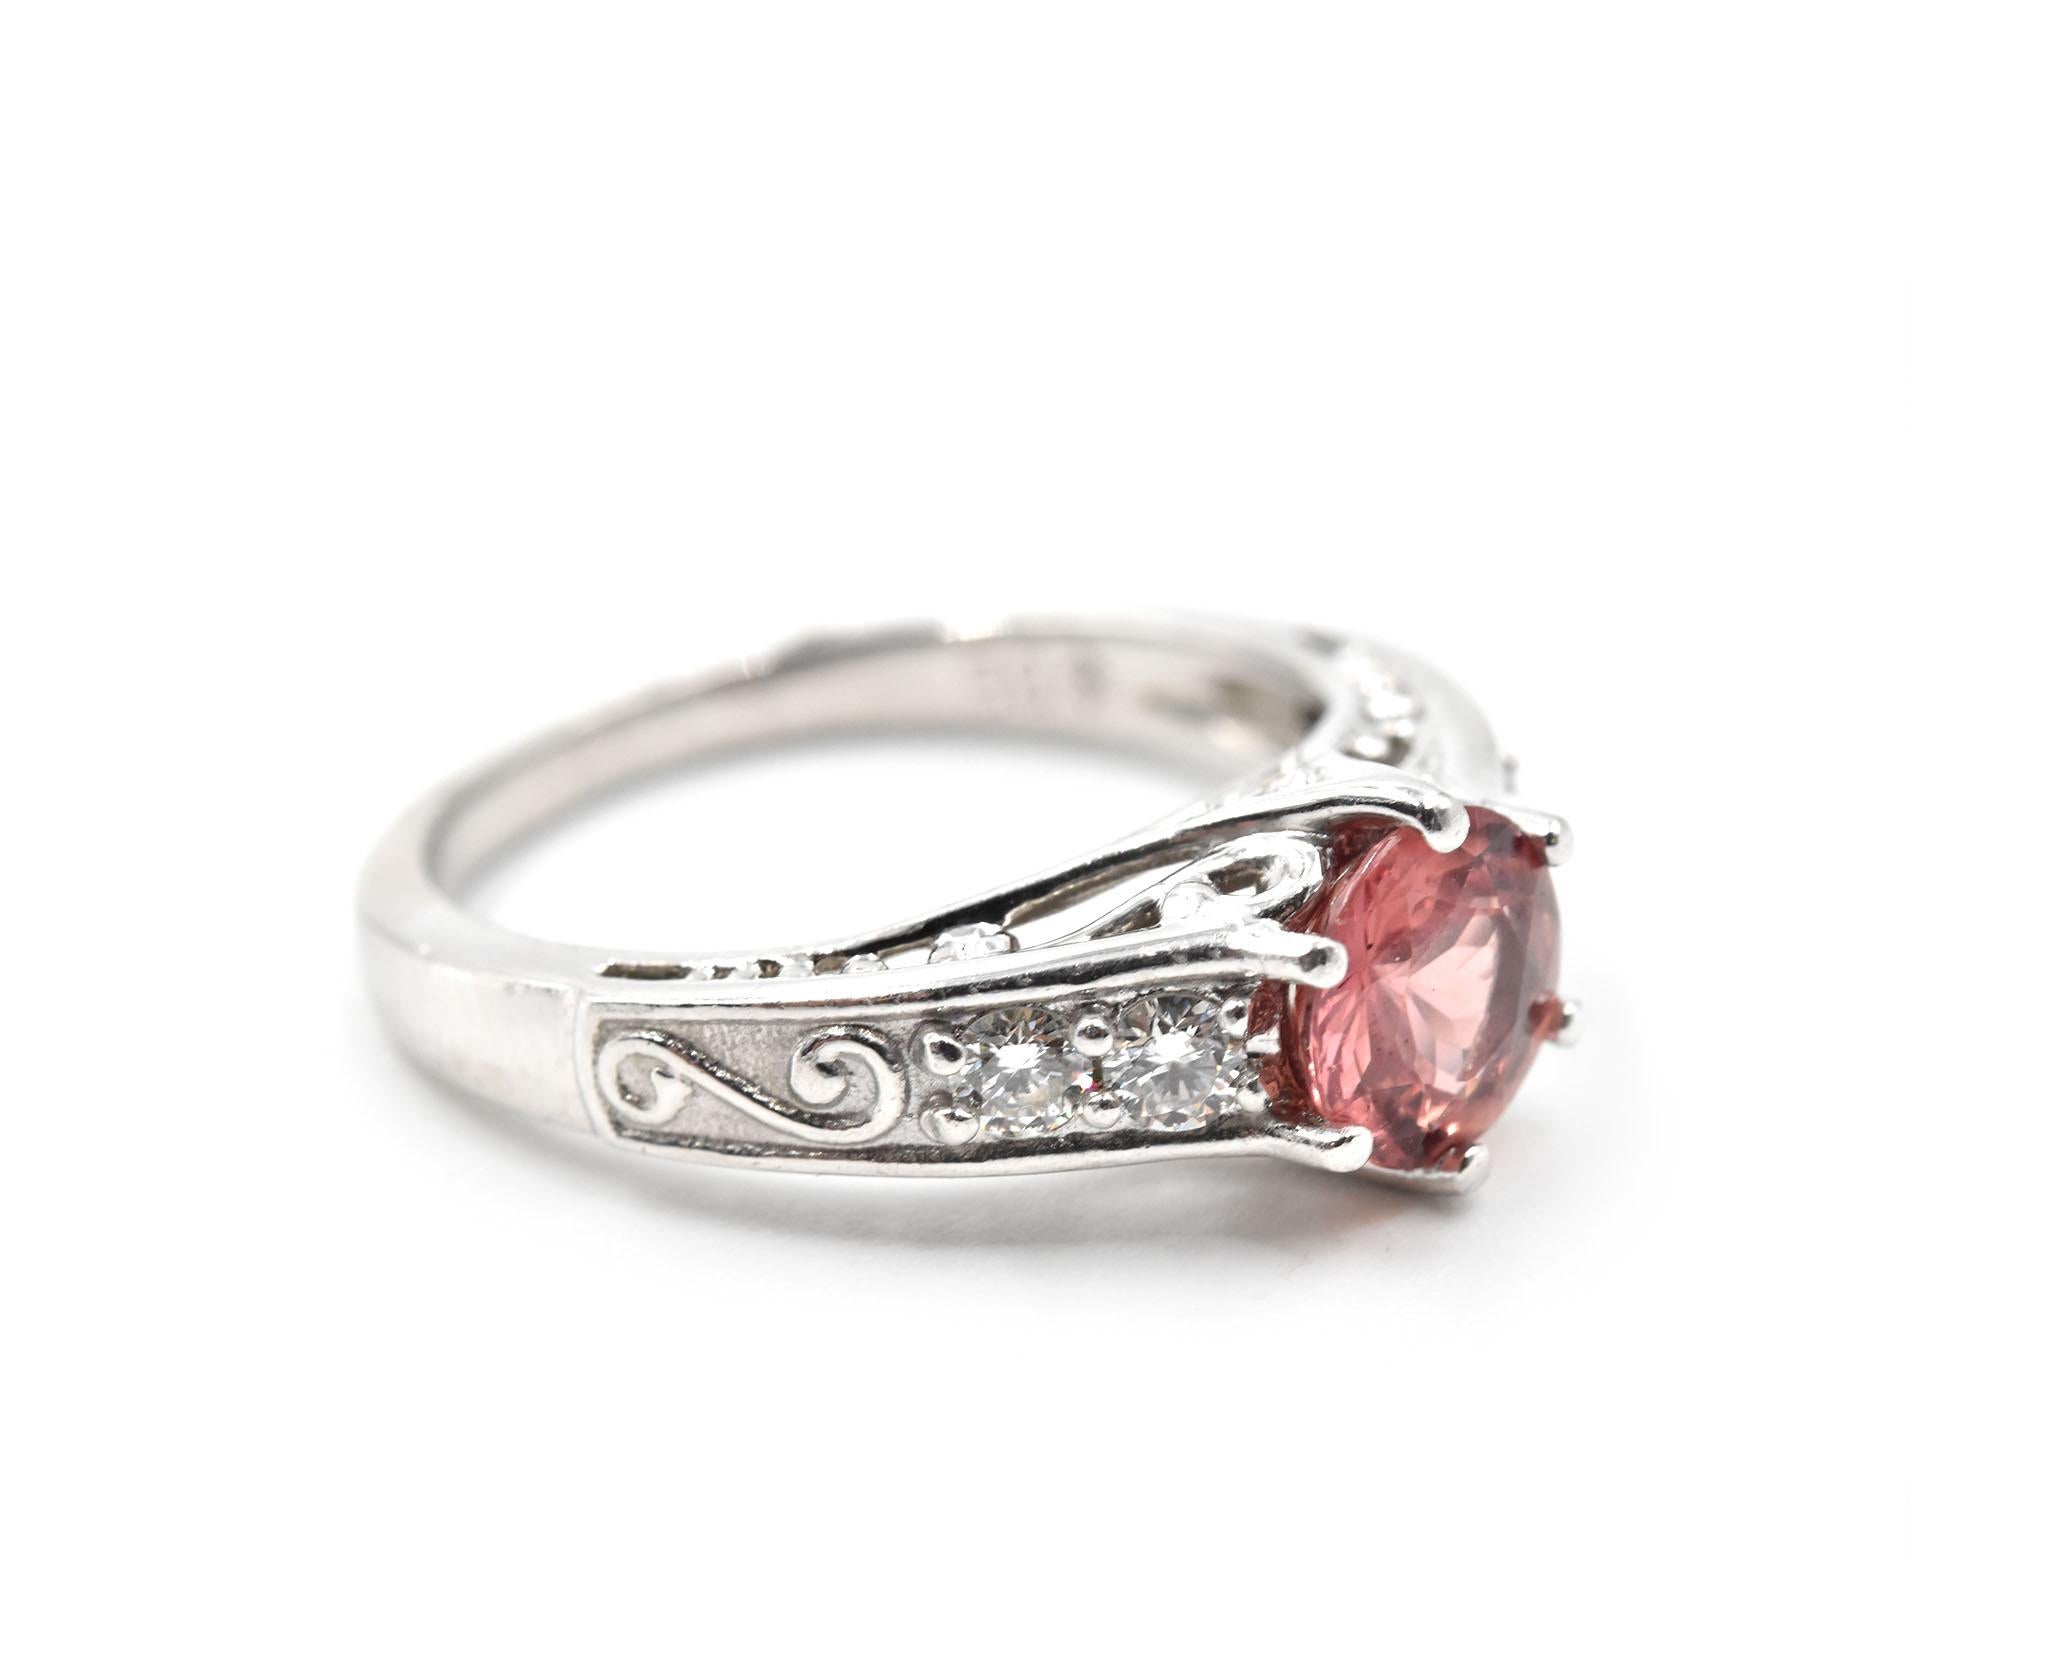 Designer: custom design
Material: platinum
Pink Sapphire: round brilliant 1.10 carat 
Diamonds: four round brilliant cut = 0.28 carat weight
Ring Size: 6 3/4 (please allow two additional shipping days for sizing requests)
Weight: 6.70 grams
